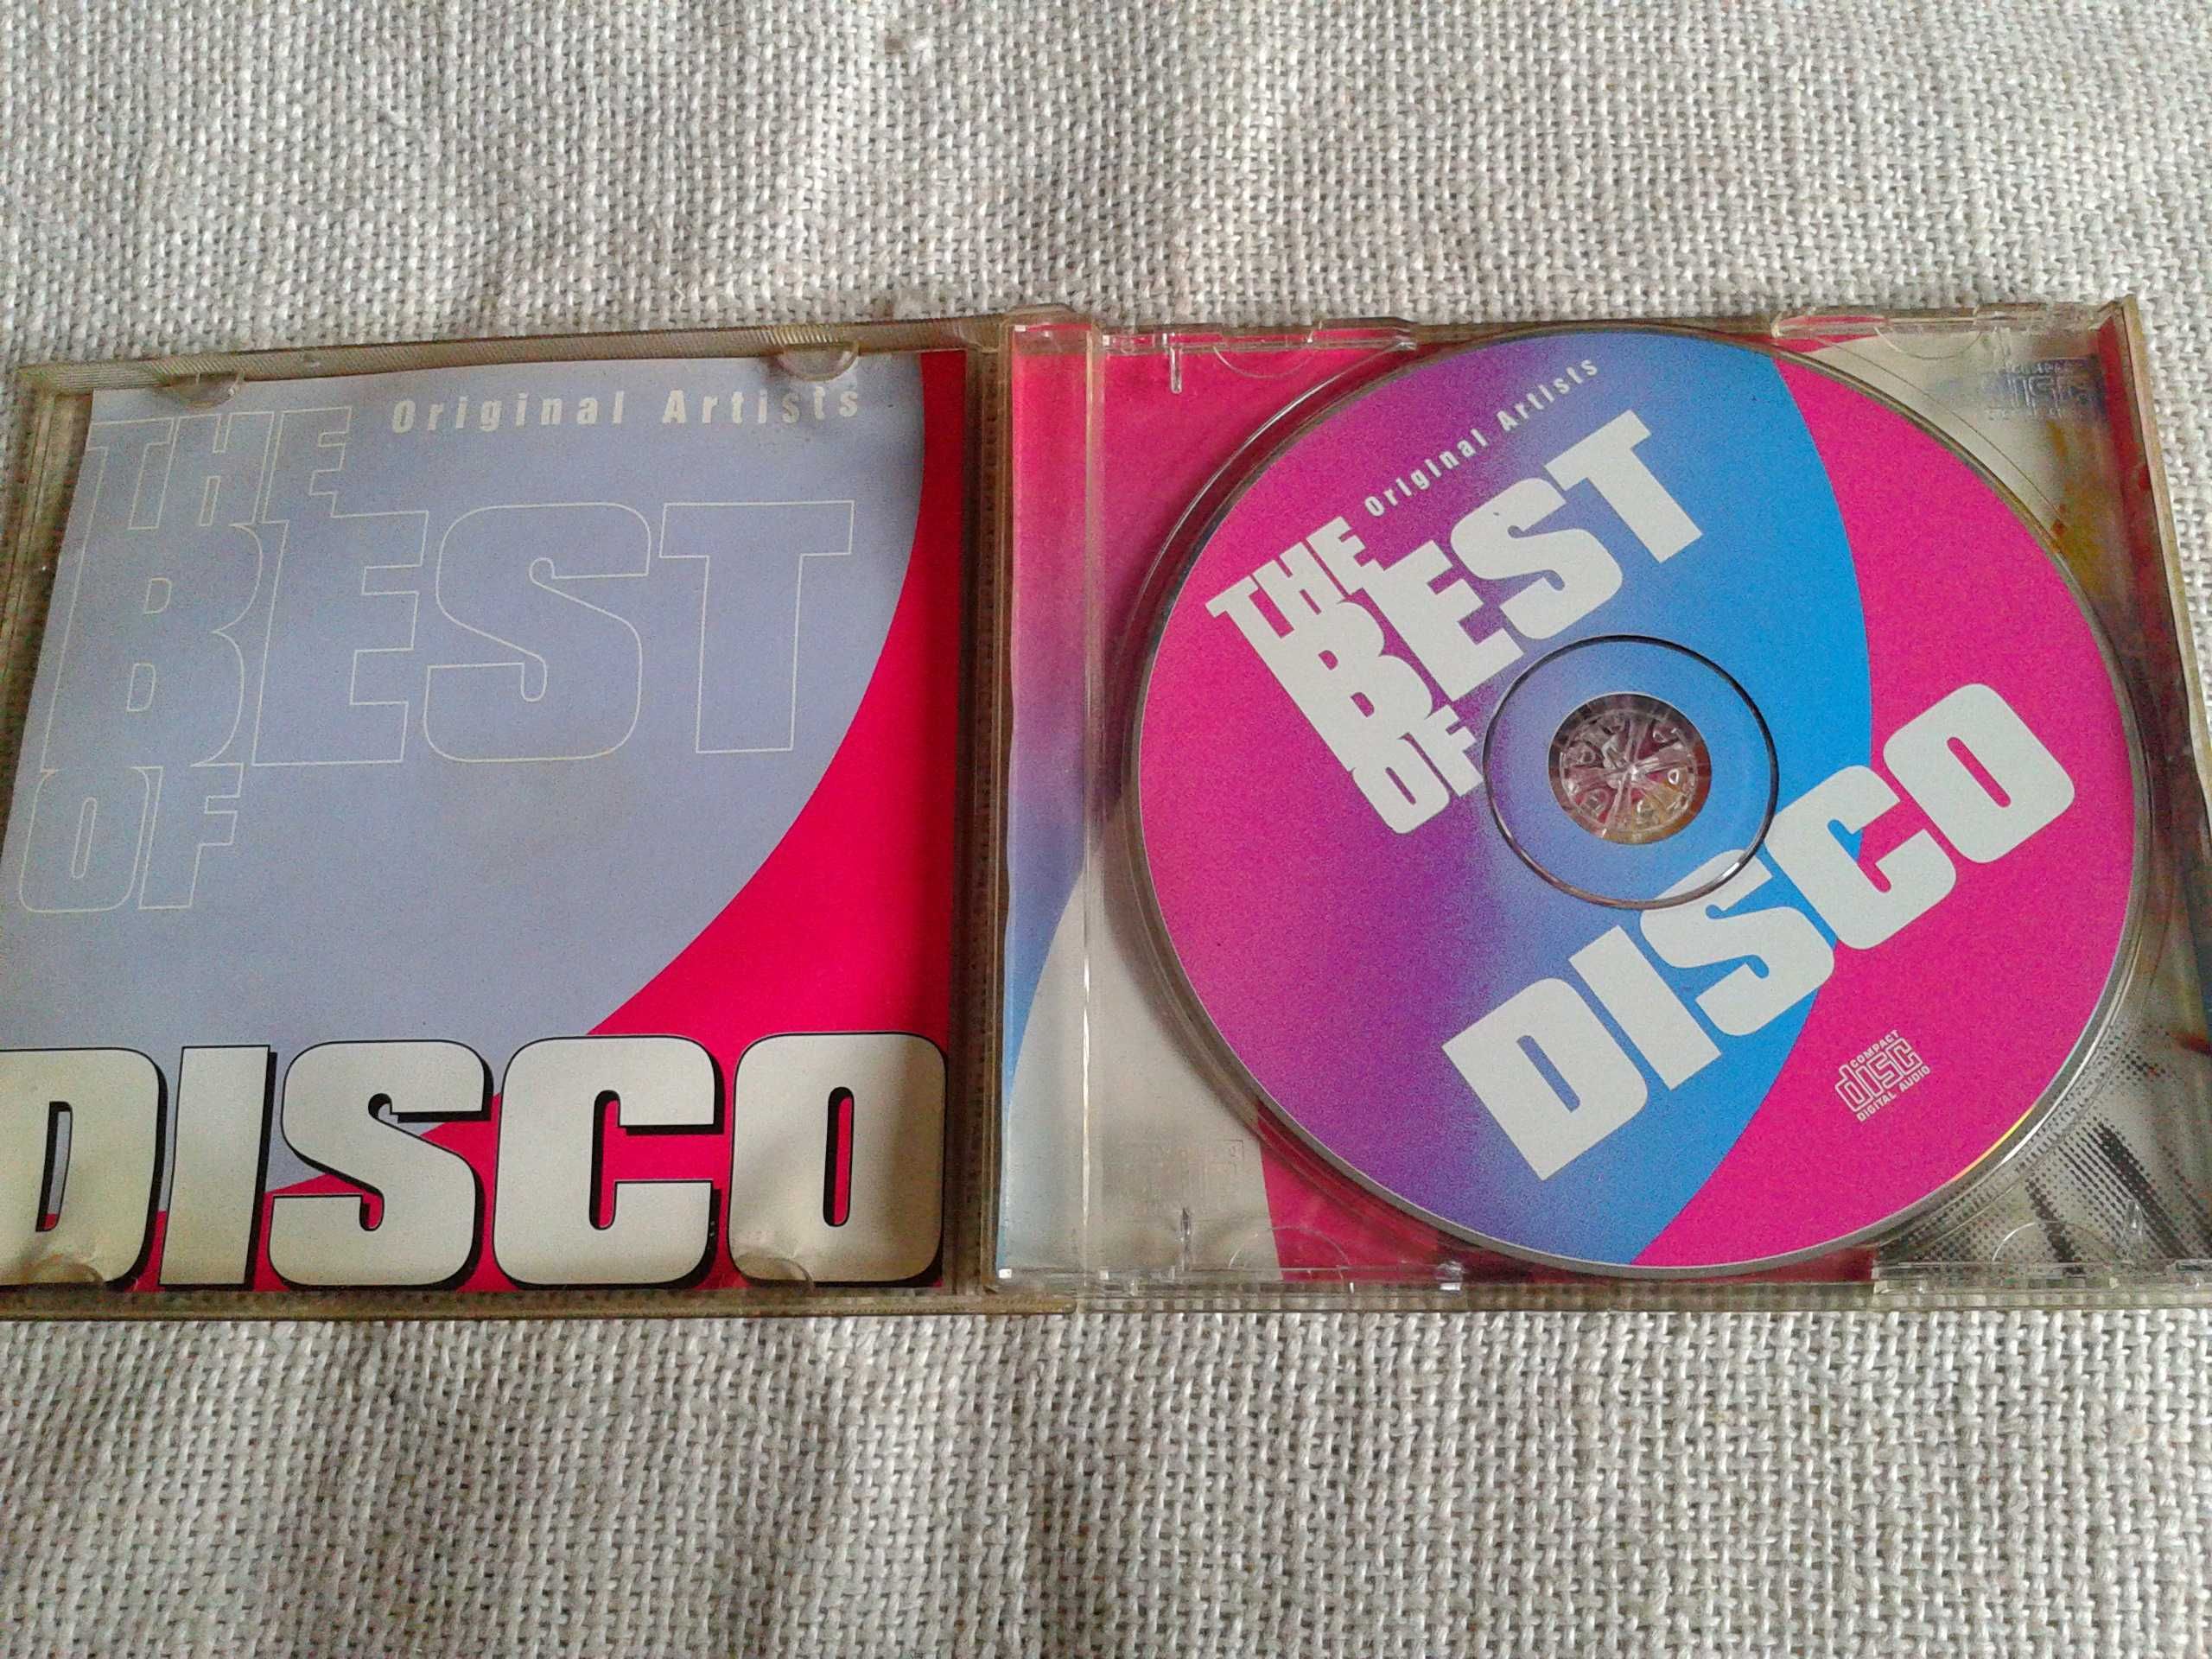 The Best Of Disco   CD